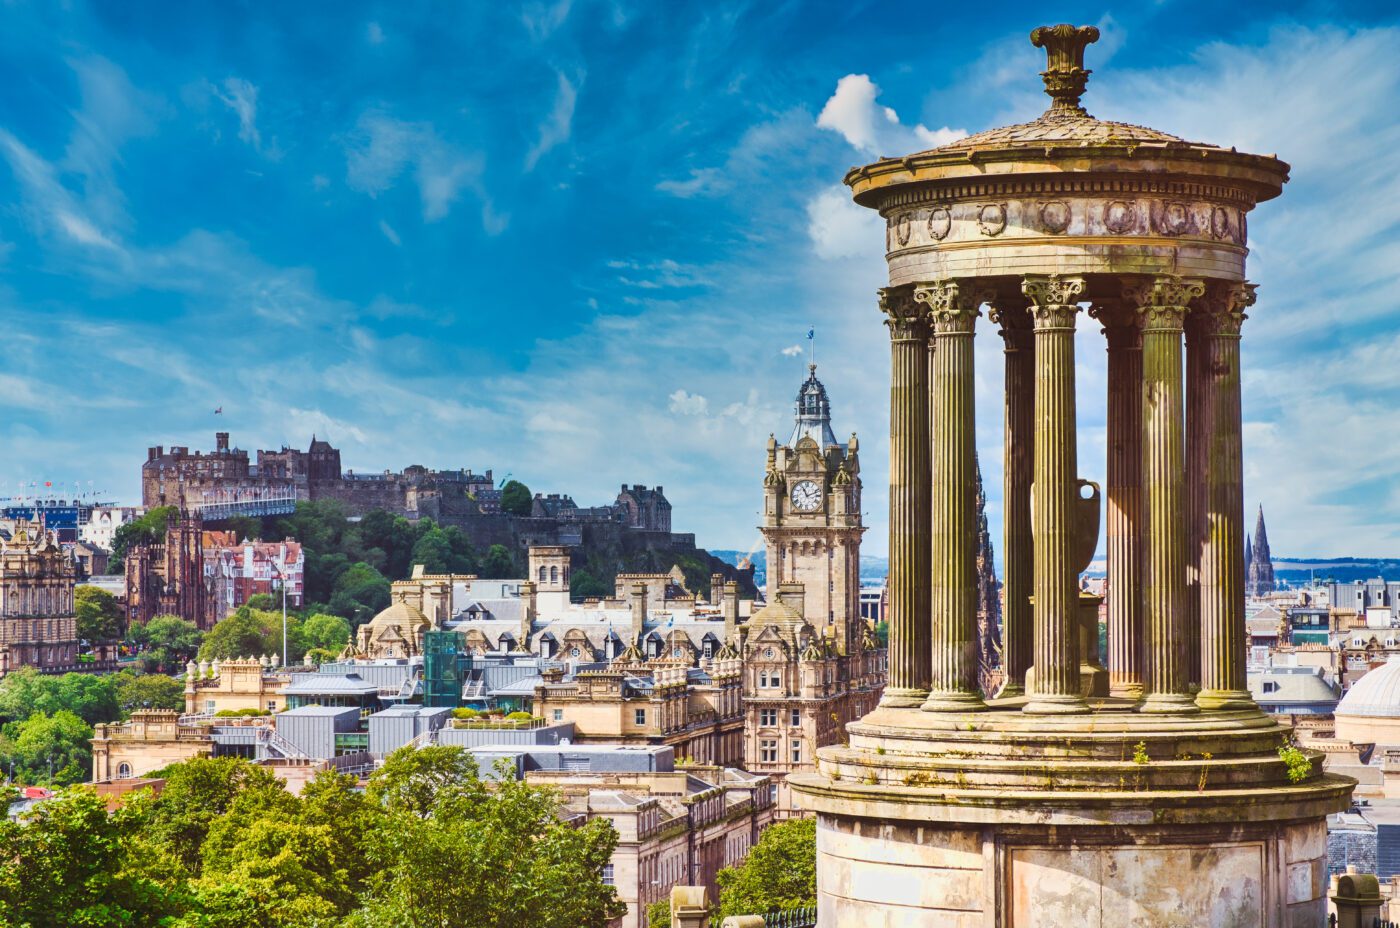 Views of the city from Calton Hill, featuring the Dugald Stewart Monument